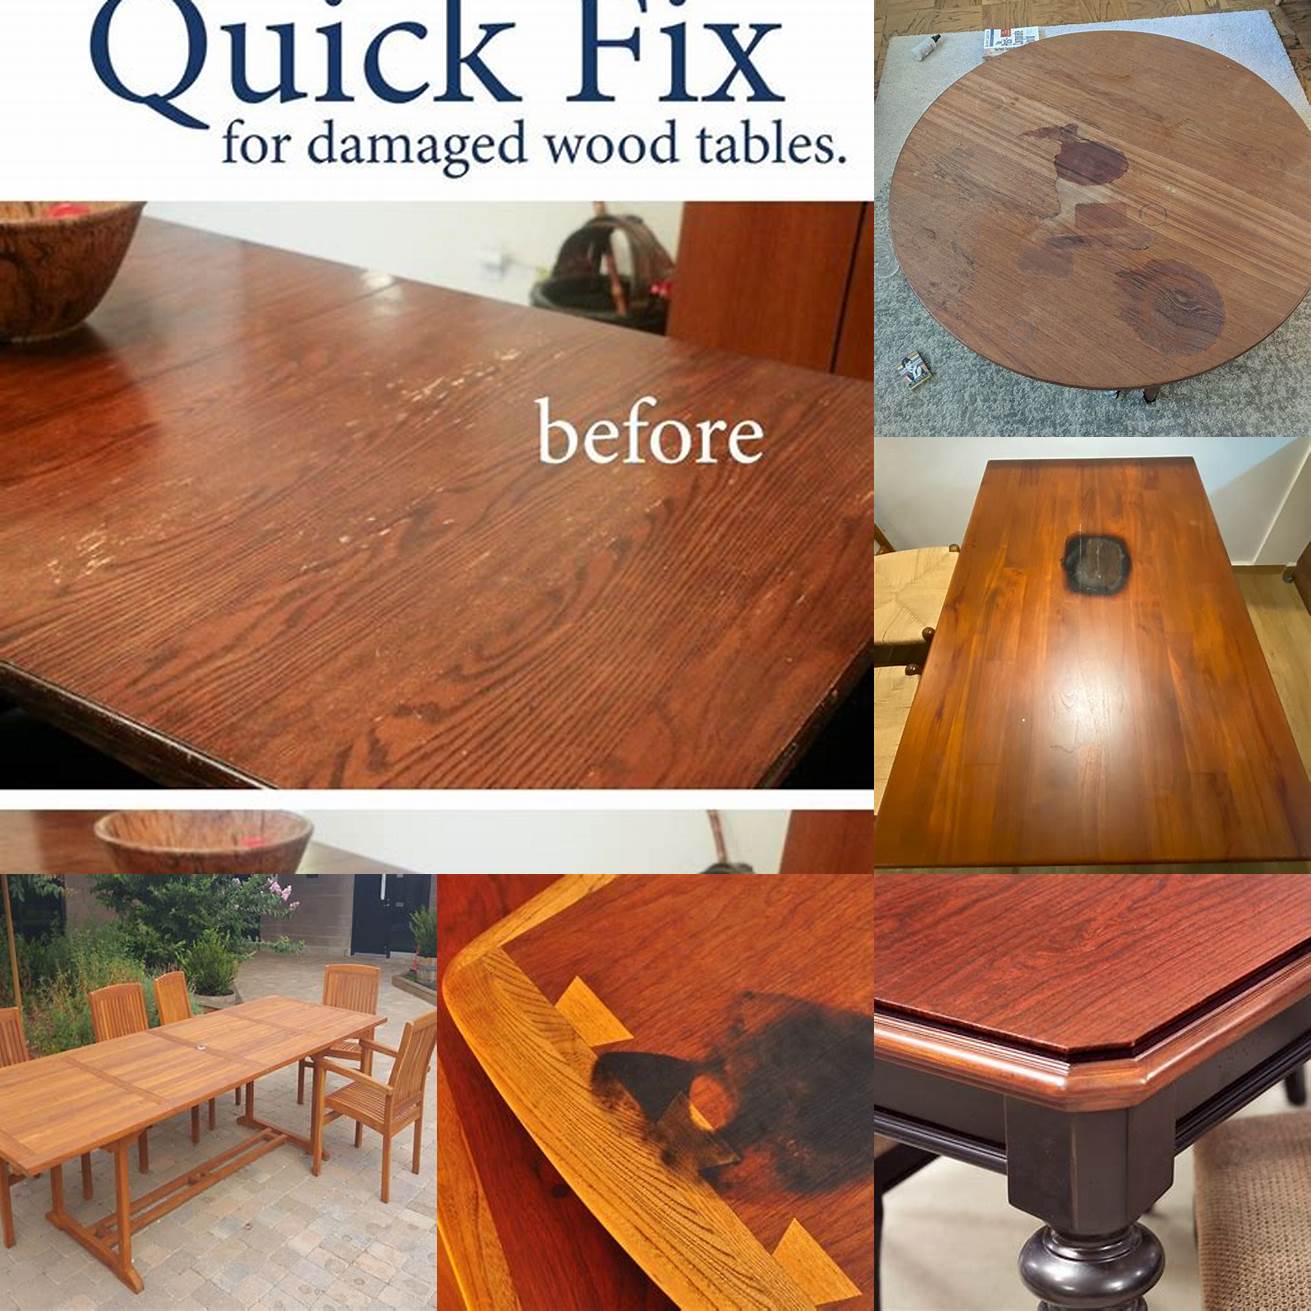 Protecting Teak Dining Table from Damage